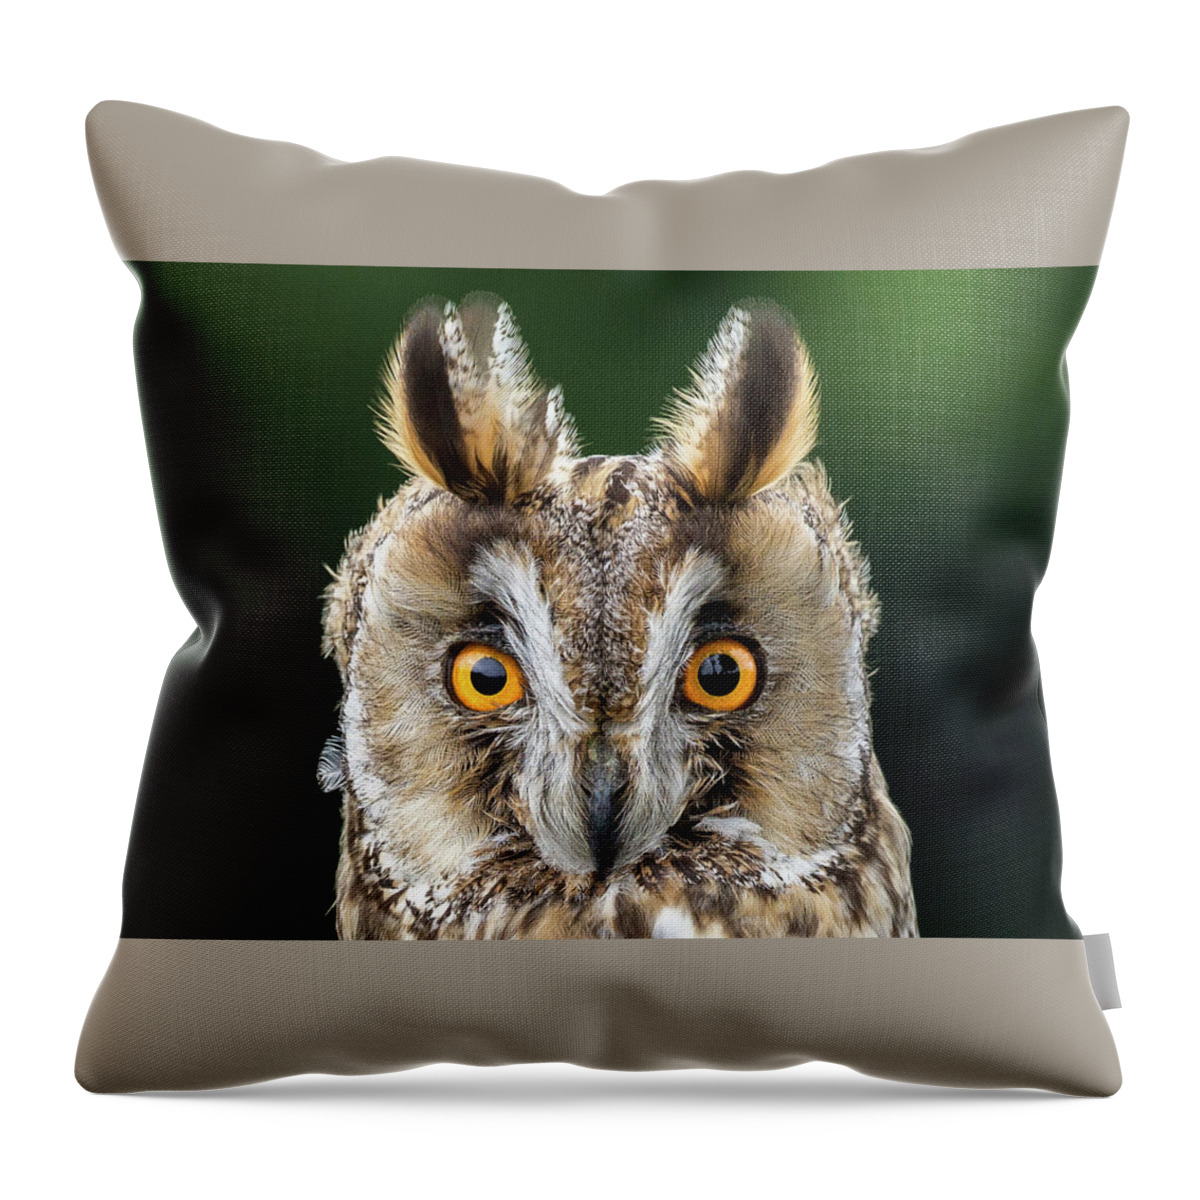 Long Eared Owl Throw Pillow featuring the photograph Long Eared Owl 1 by Nigel R Bell